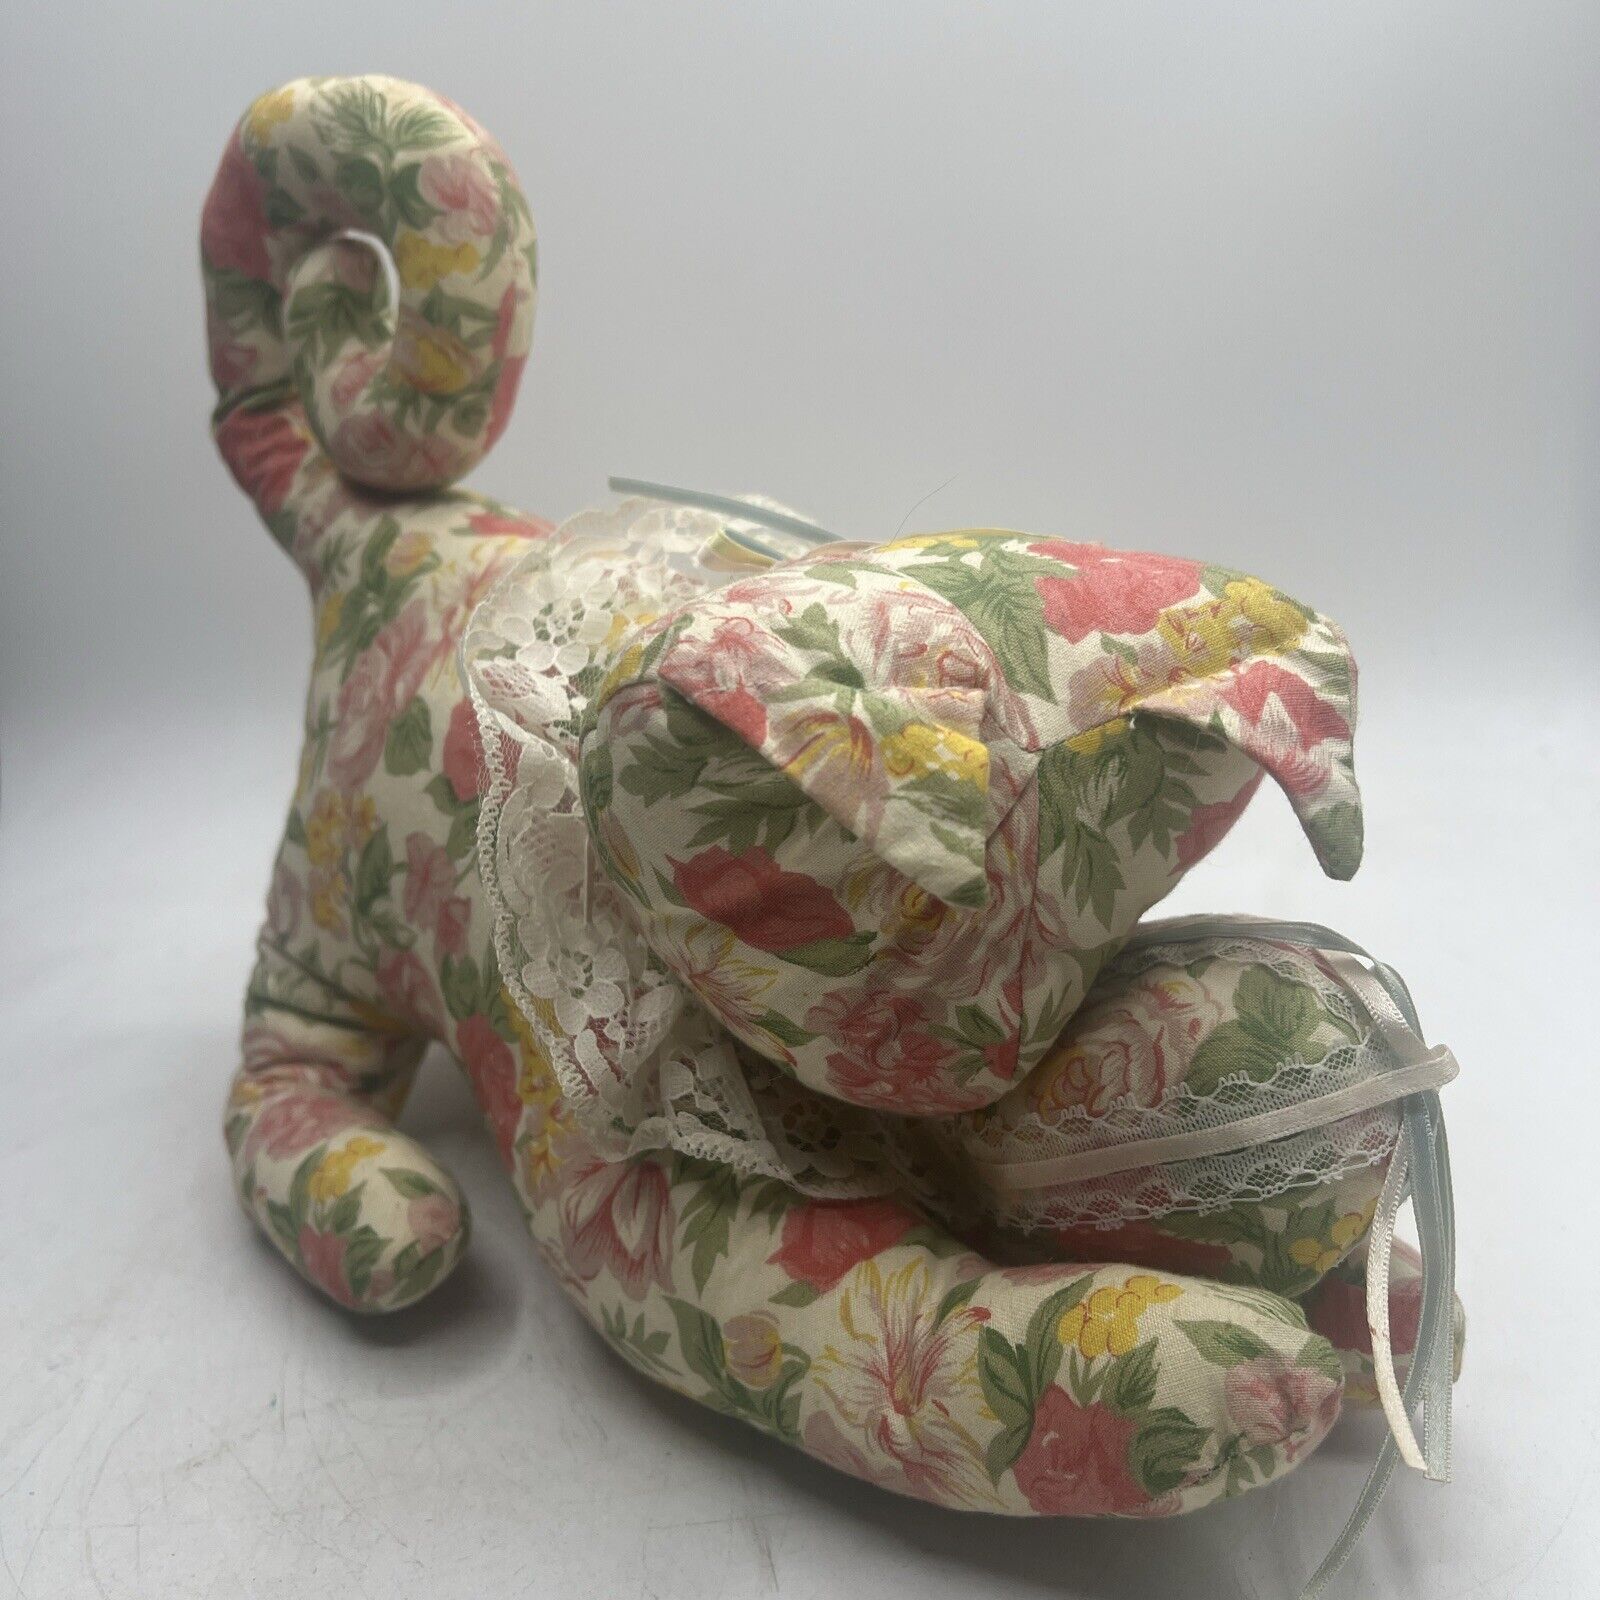 Fabric Cat Stuffed Doll Plush Pouncing Floral Country Chic Cottagecore Vintage